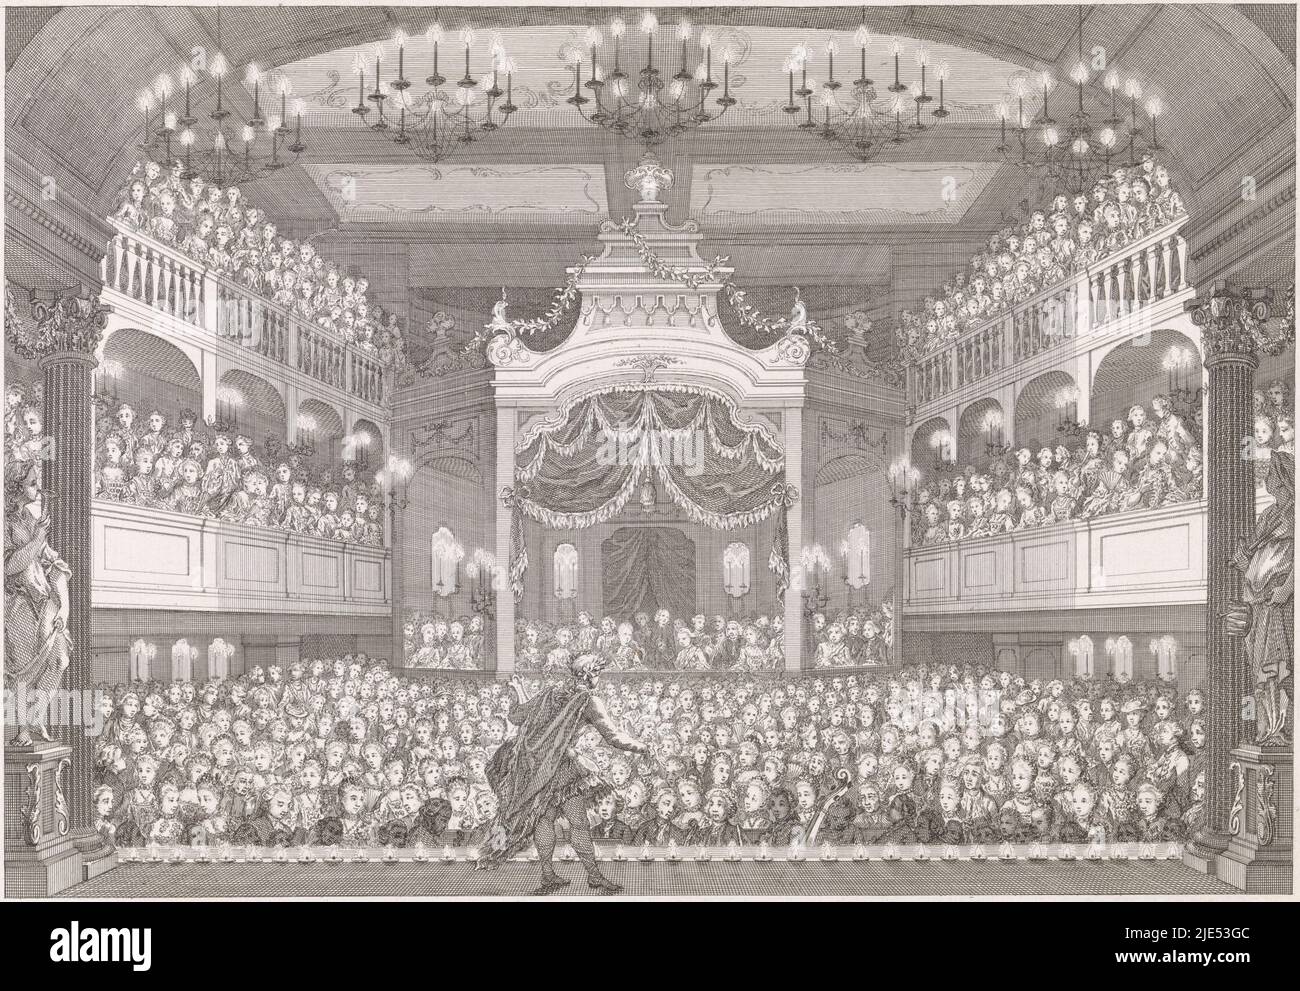 Stadholder William V and Princess Wilhelmina of Prussia attend a theatrical performance in the royal lodge in the new Amsterdam Theatre on Keizersgracht, 1 June 1768. Part of a print series with title print and 14 plates of the inauguration of the prince and princess in Amsterdam, 30 May - 4 June 1768., Princely Lodge in the Amsterdamse Schouwburg for the princely couple, 1768 Image of the Joyful Bedfellows and Pleiades that took place on arrival and during the verblyf (. ...) Willem (...) and zyne Gemaalinne (...) occurred in Amsterdam, on Monday, the 30th of May, and a few days later, in the Stock Photo